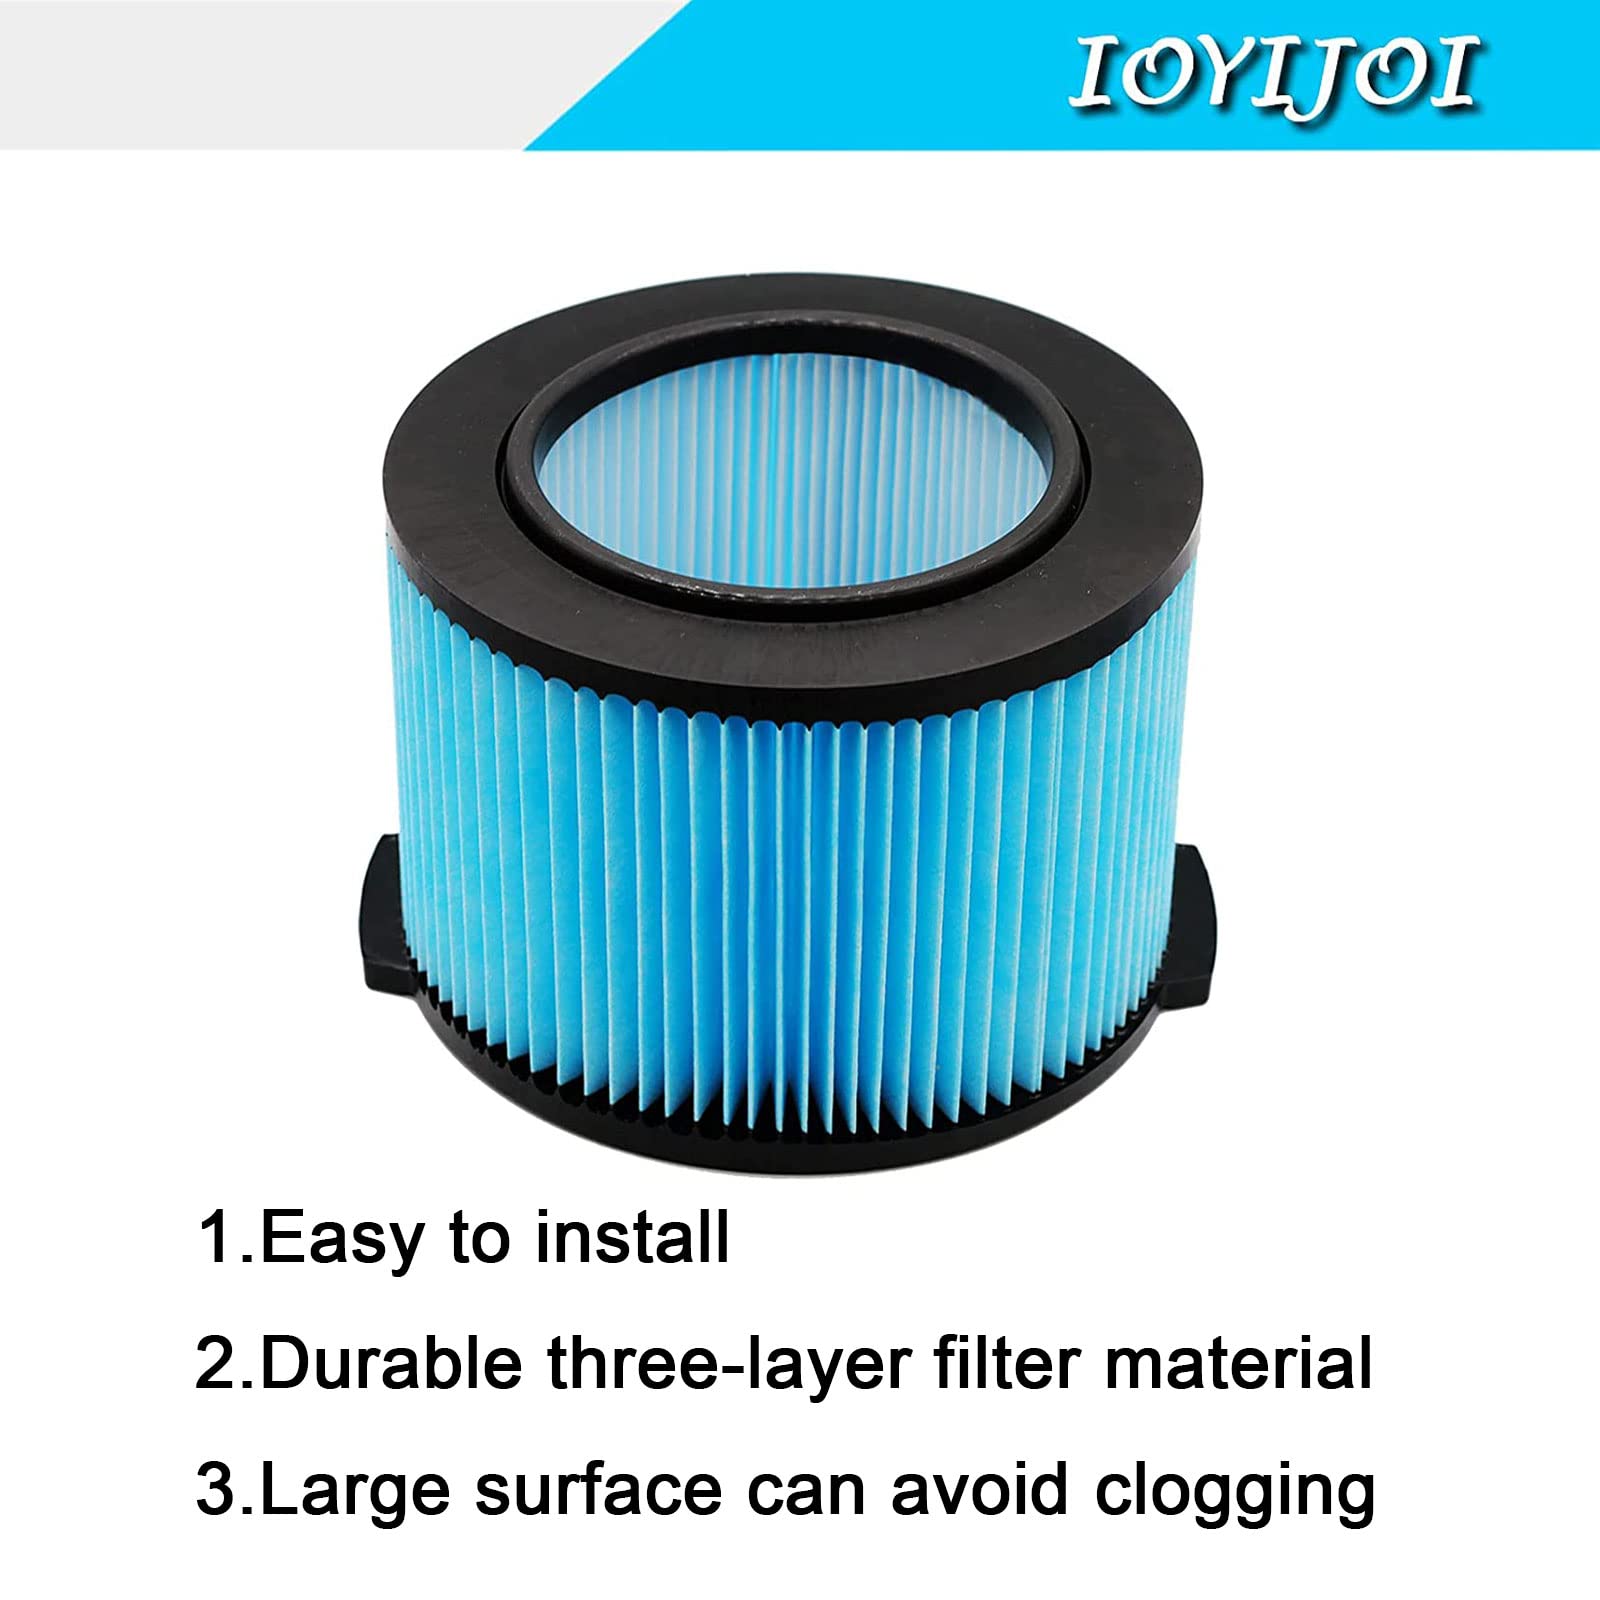 3-Layer Replacement Filter for Ridgid VF3500 3-4.5 Gallon Vacuum WD3050, WD4070, WD4080, WD4522, 4000RV, 4500RV, 2 PACK